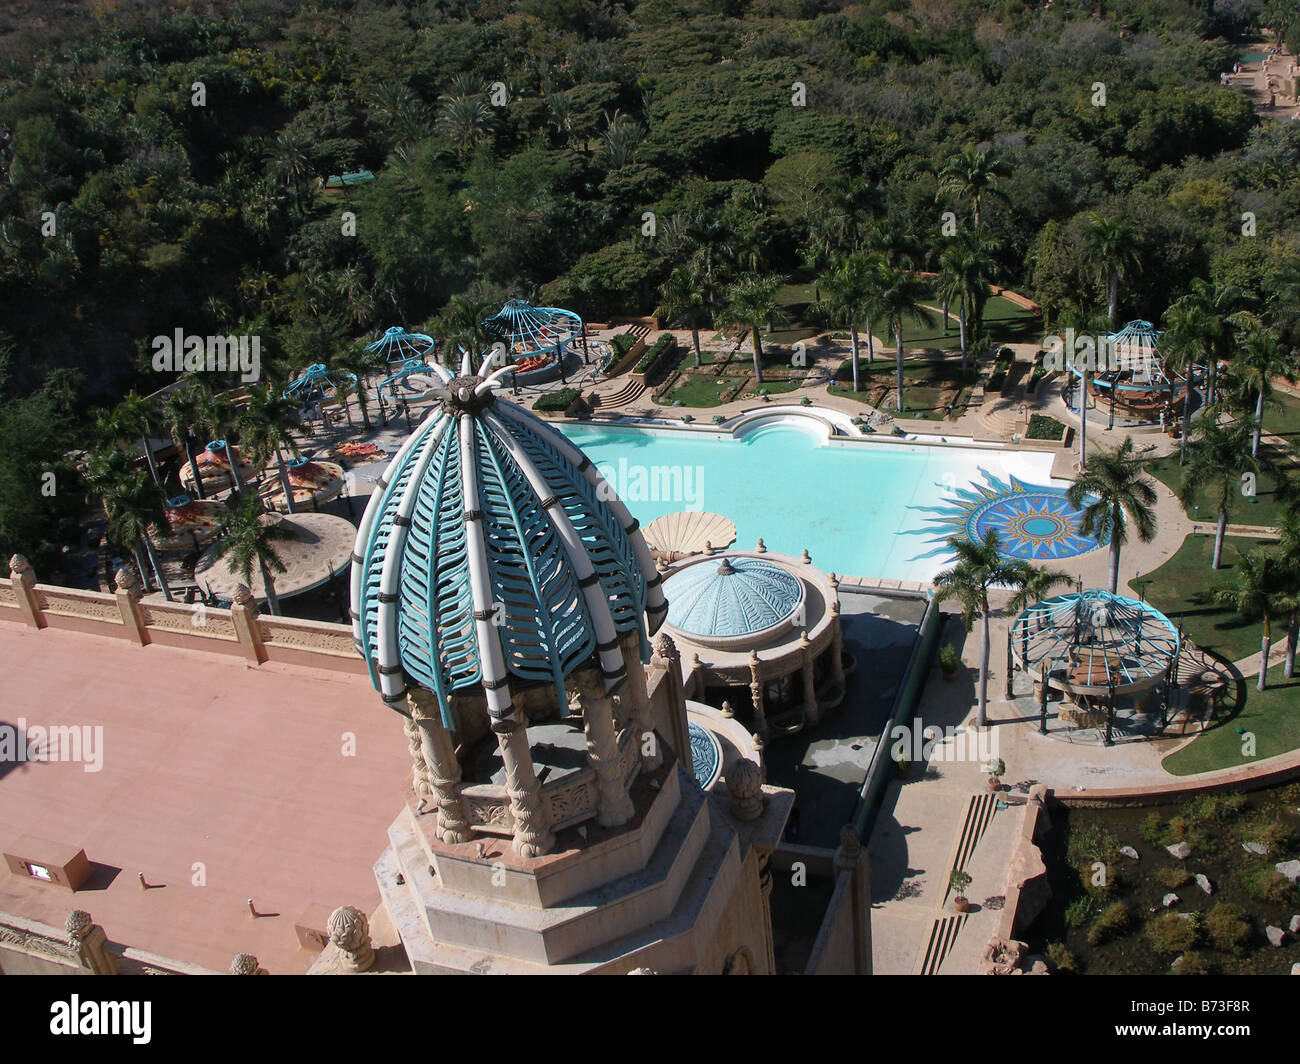 A view from The Palace of the Lost City in Sun City, South Africa Stock Photo